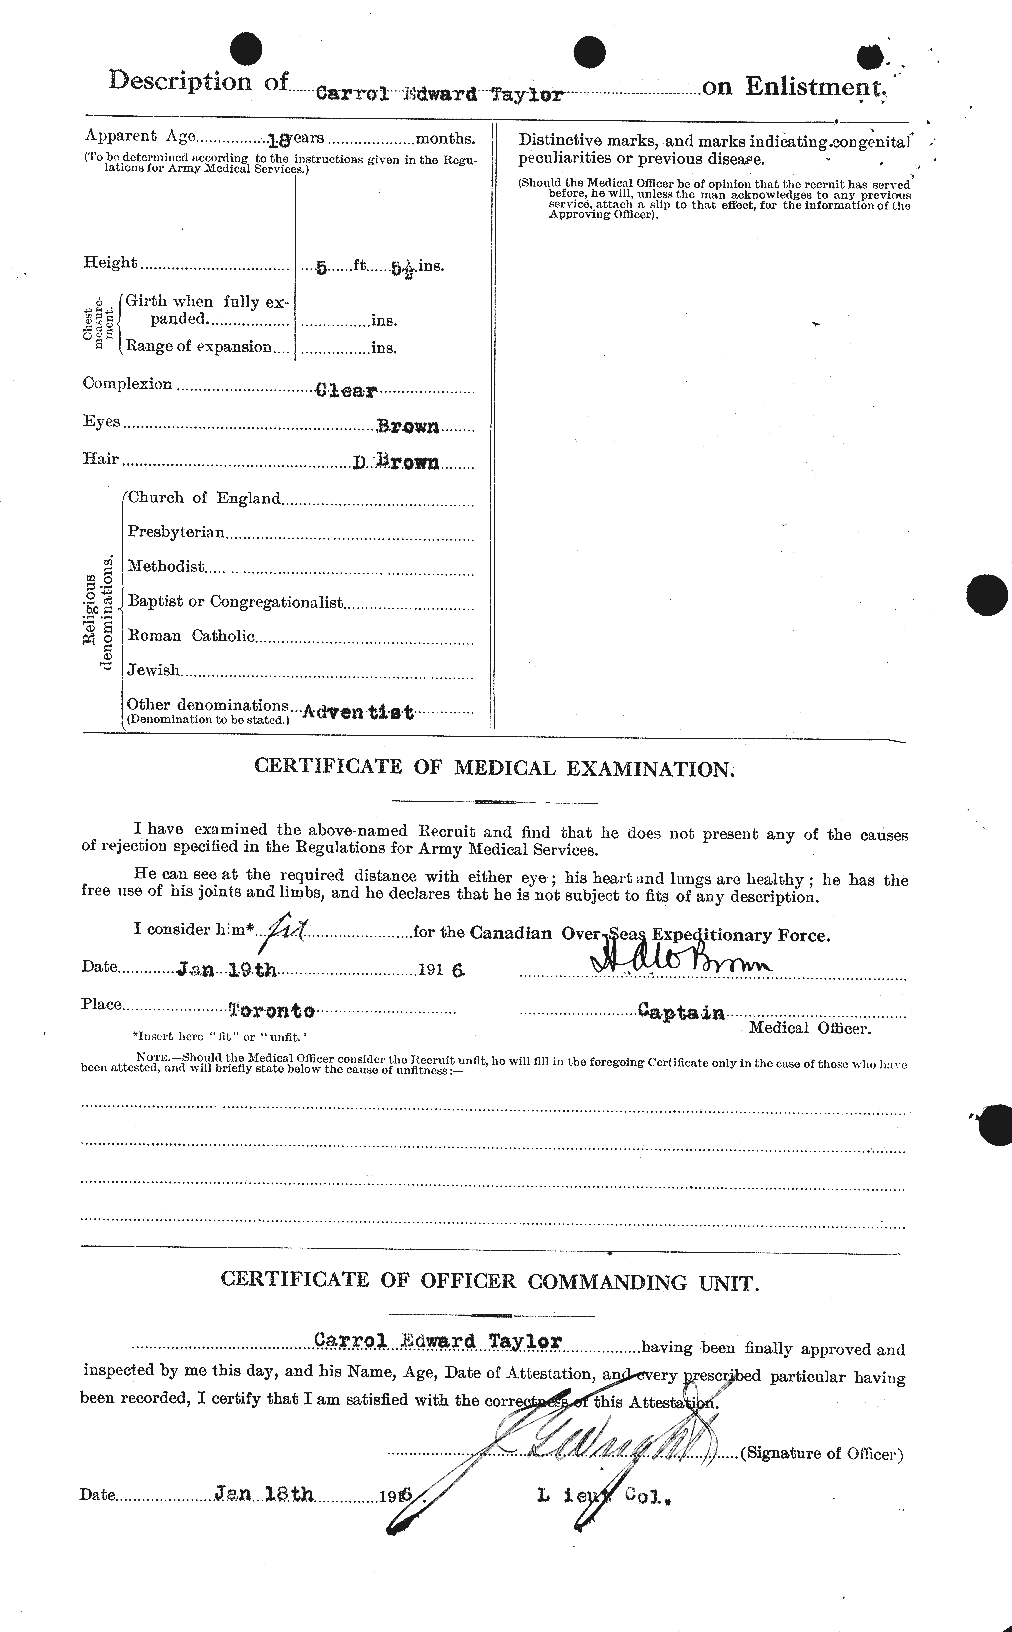 Personnel Records of the First World War - CEF 626787b